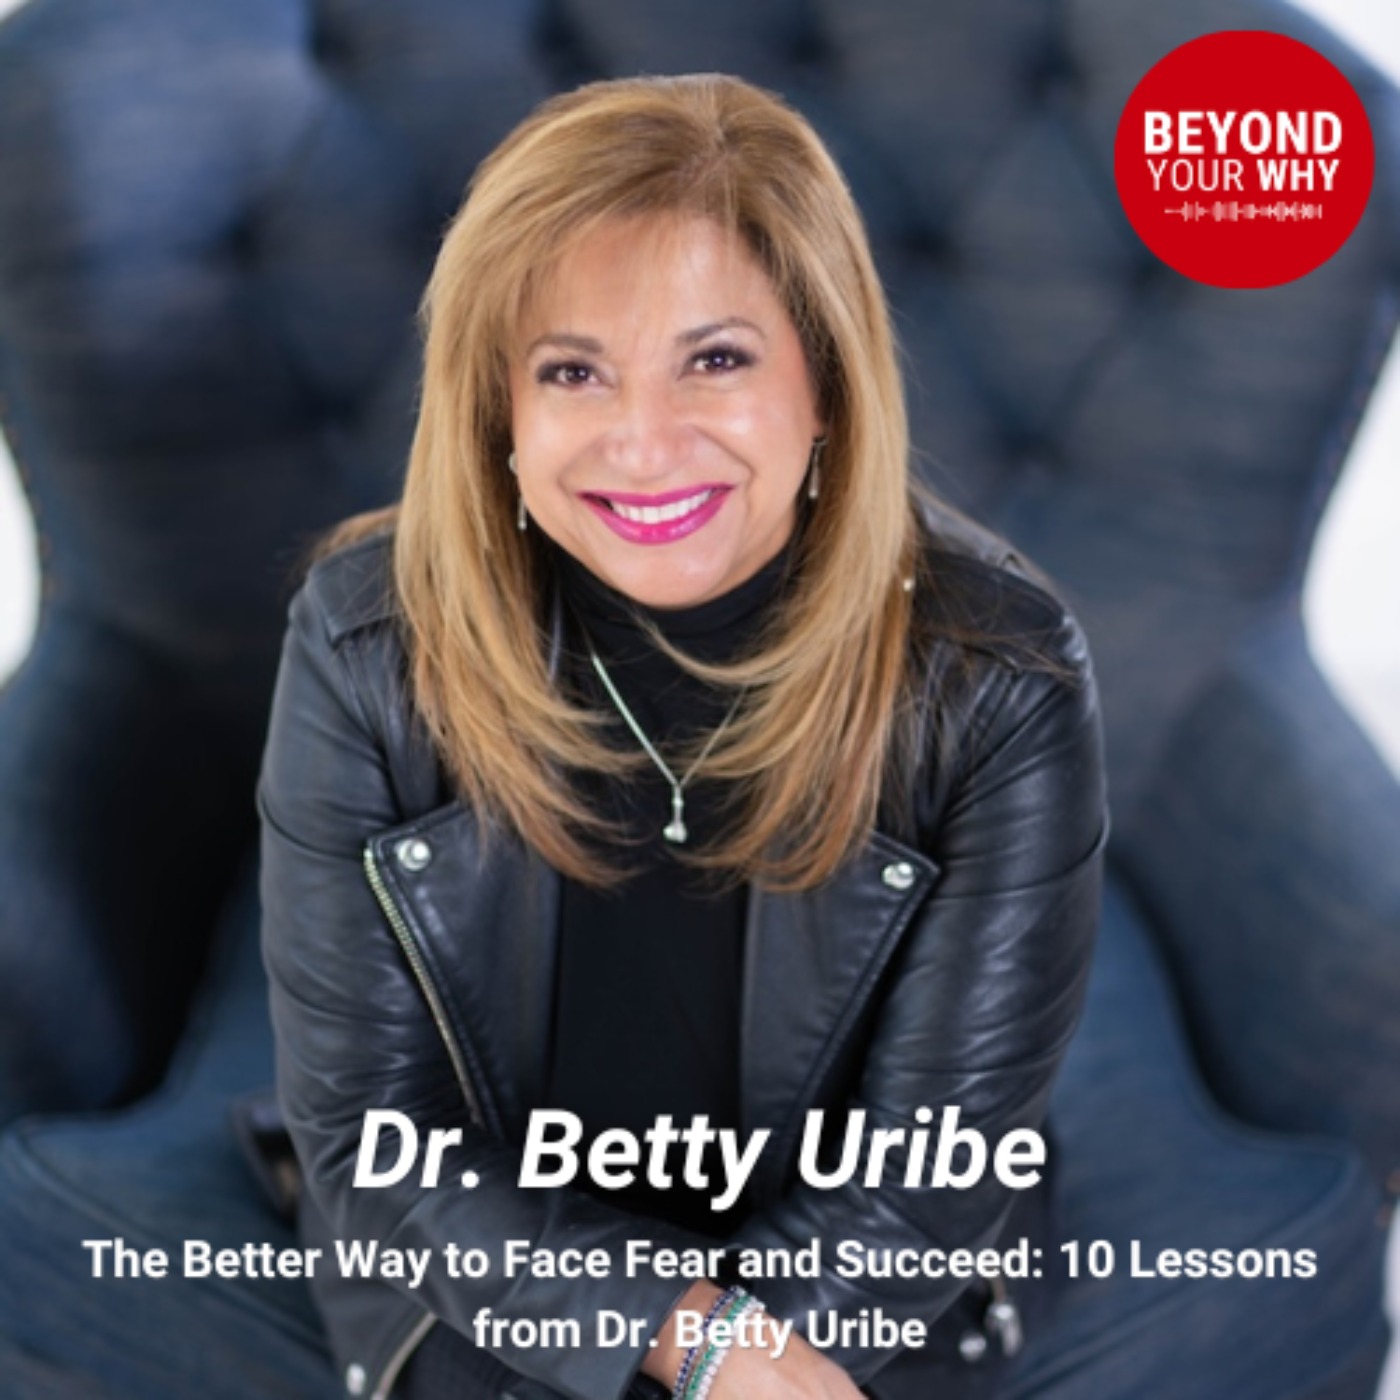 The Better Way to Face Fear and Succeed: 10 Lessons from Dr. Betty Uribe